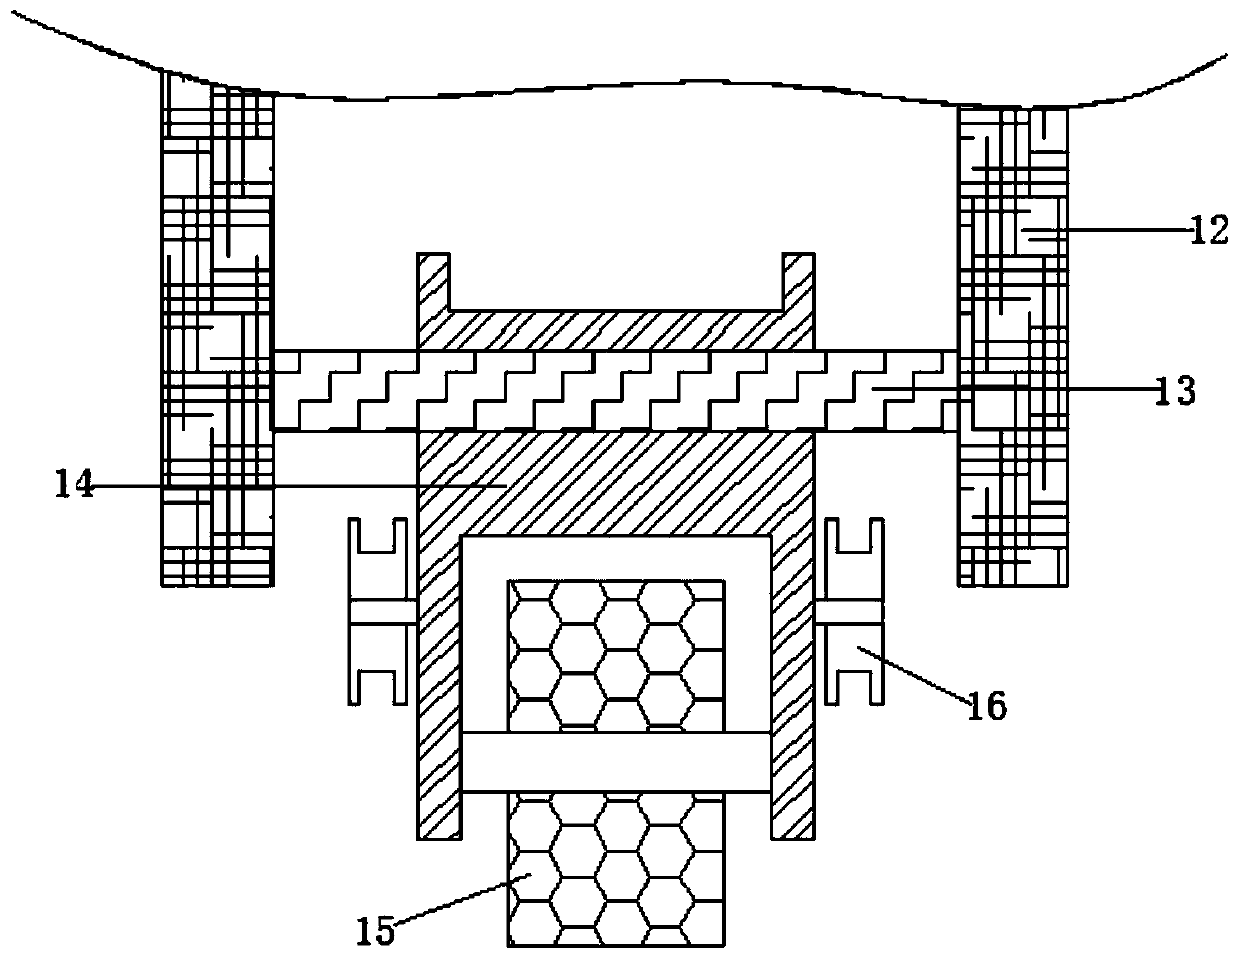 Fire hose dewatering and winding device